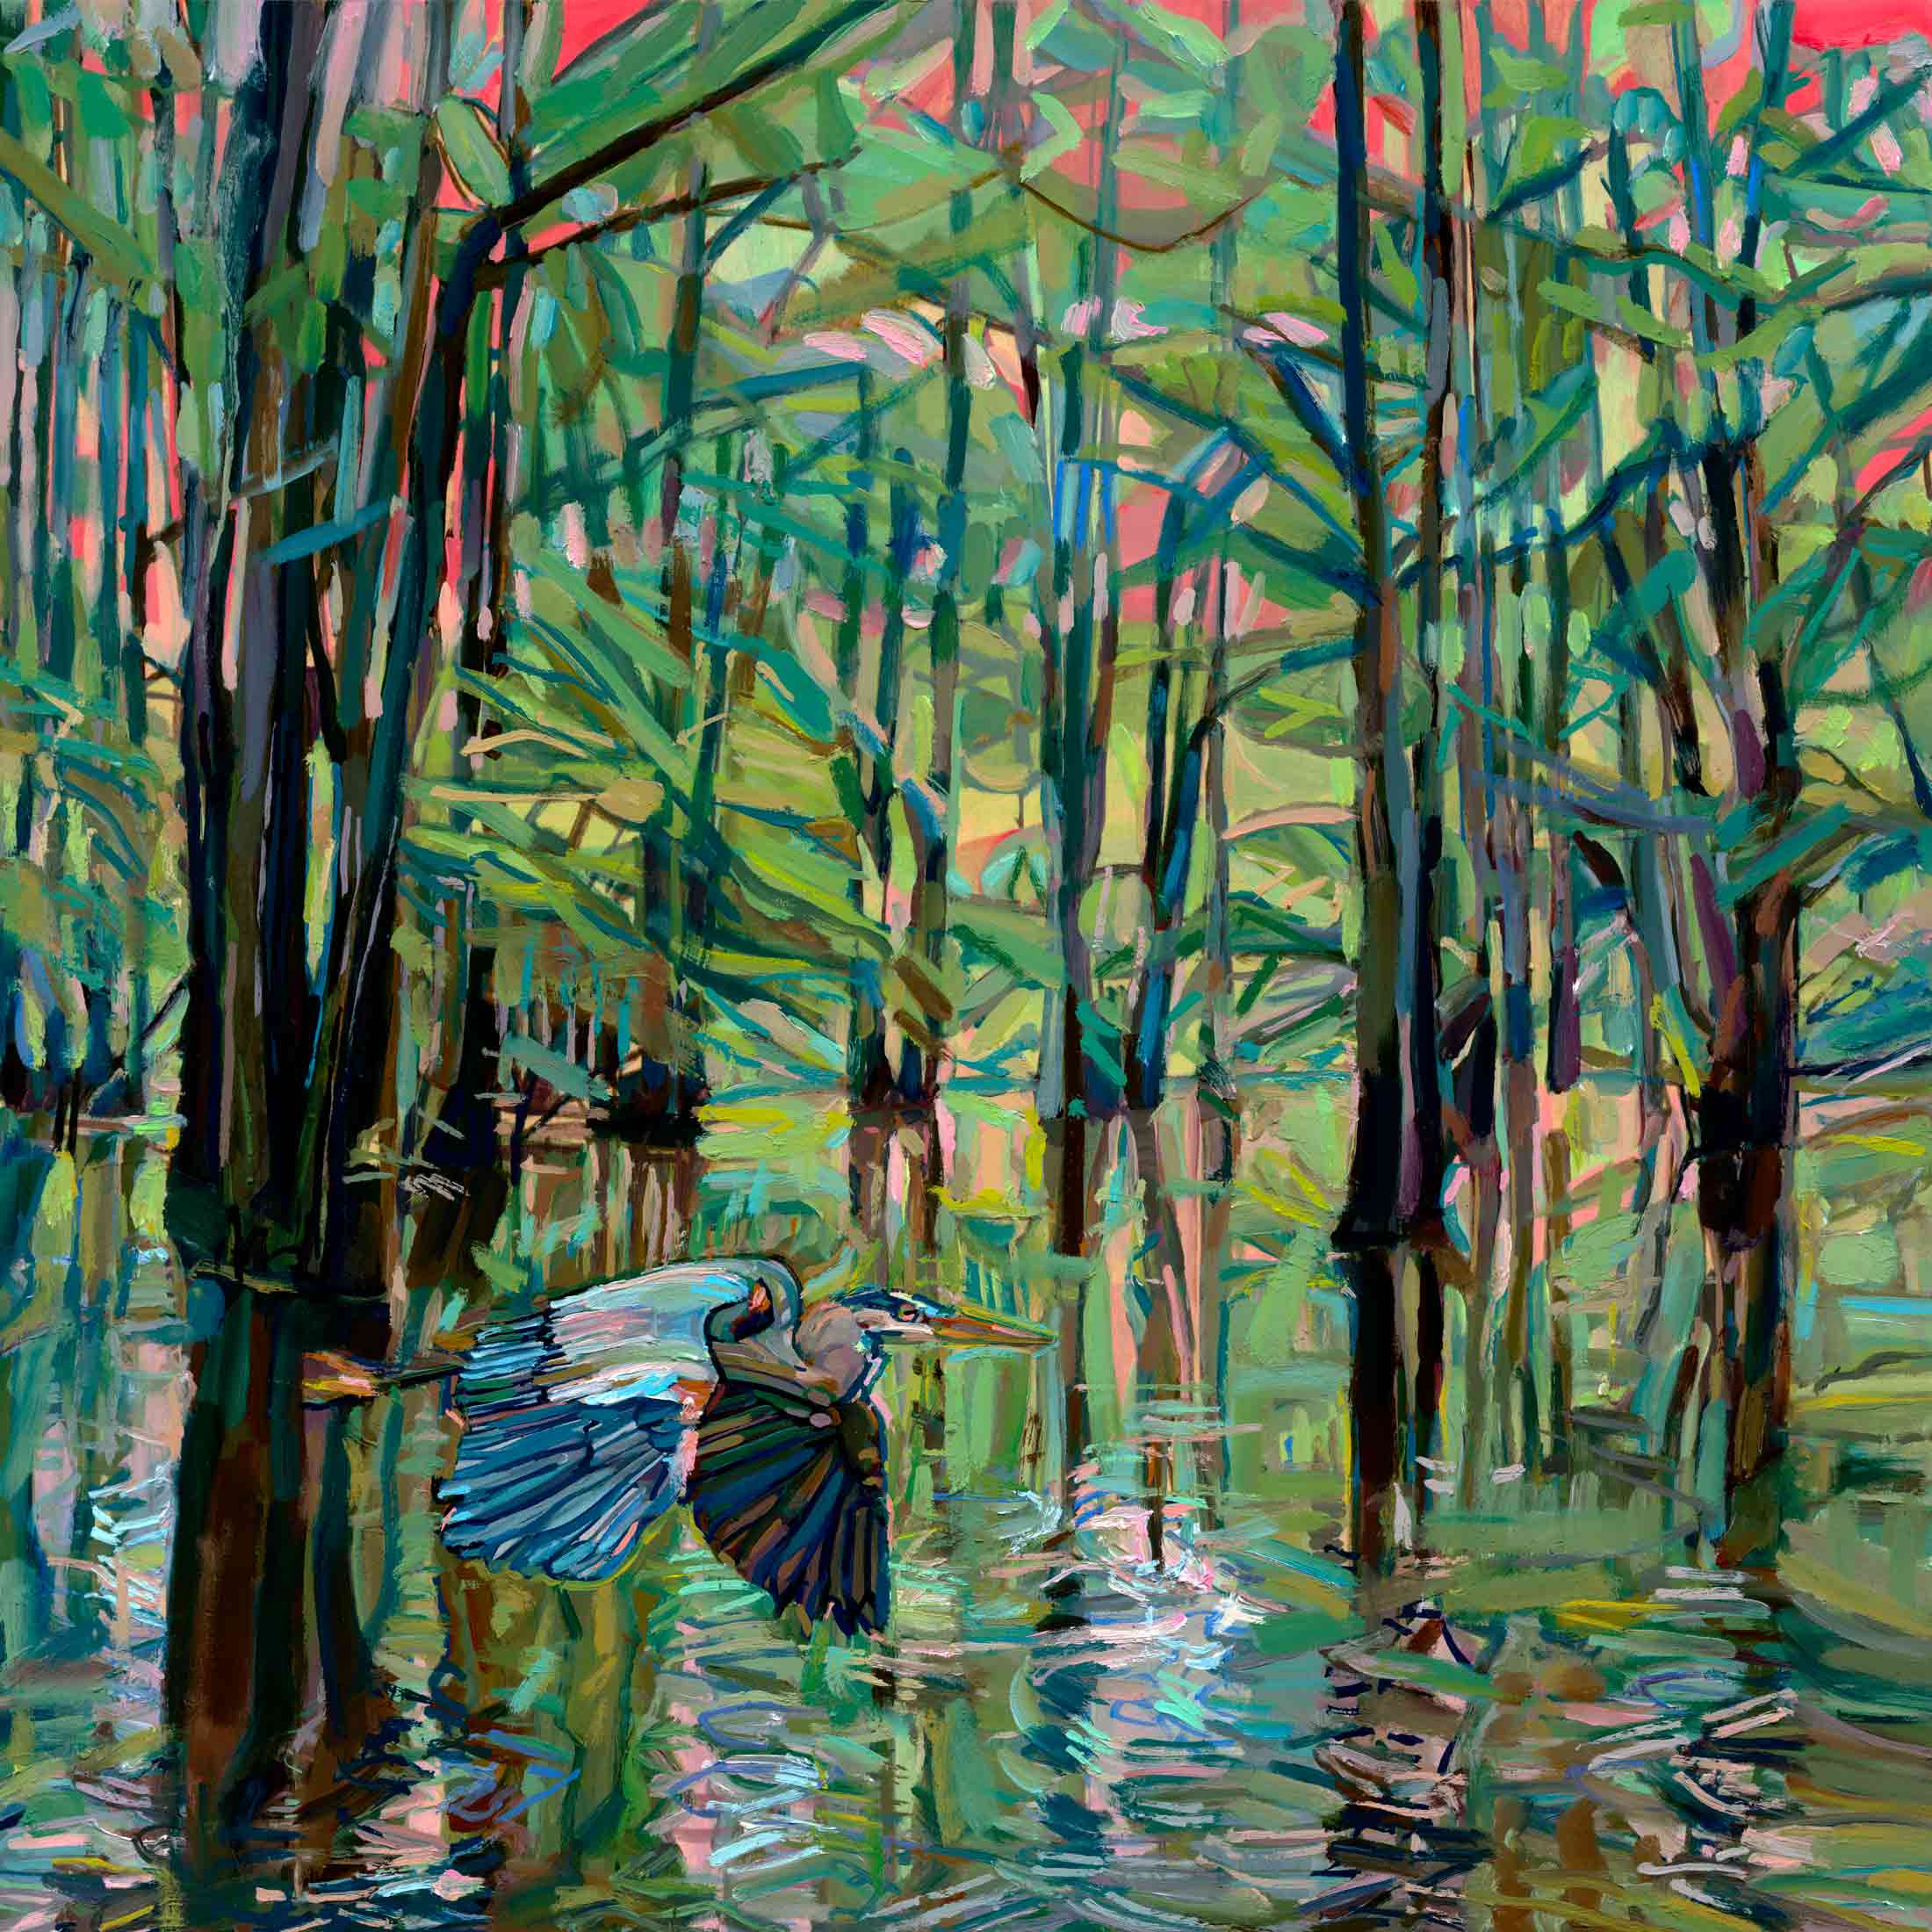 Blue Heron painting with Cypress Trees, wildlife oil painting of Caddo Lake, Texas